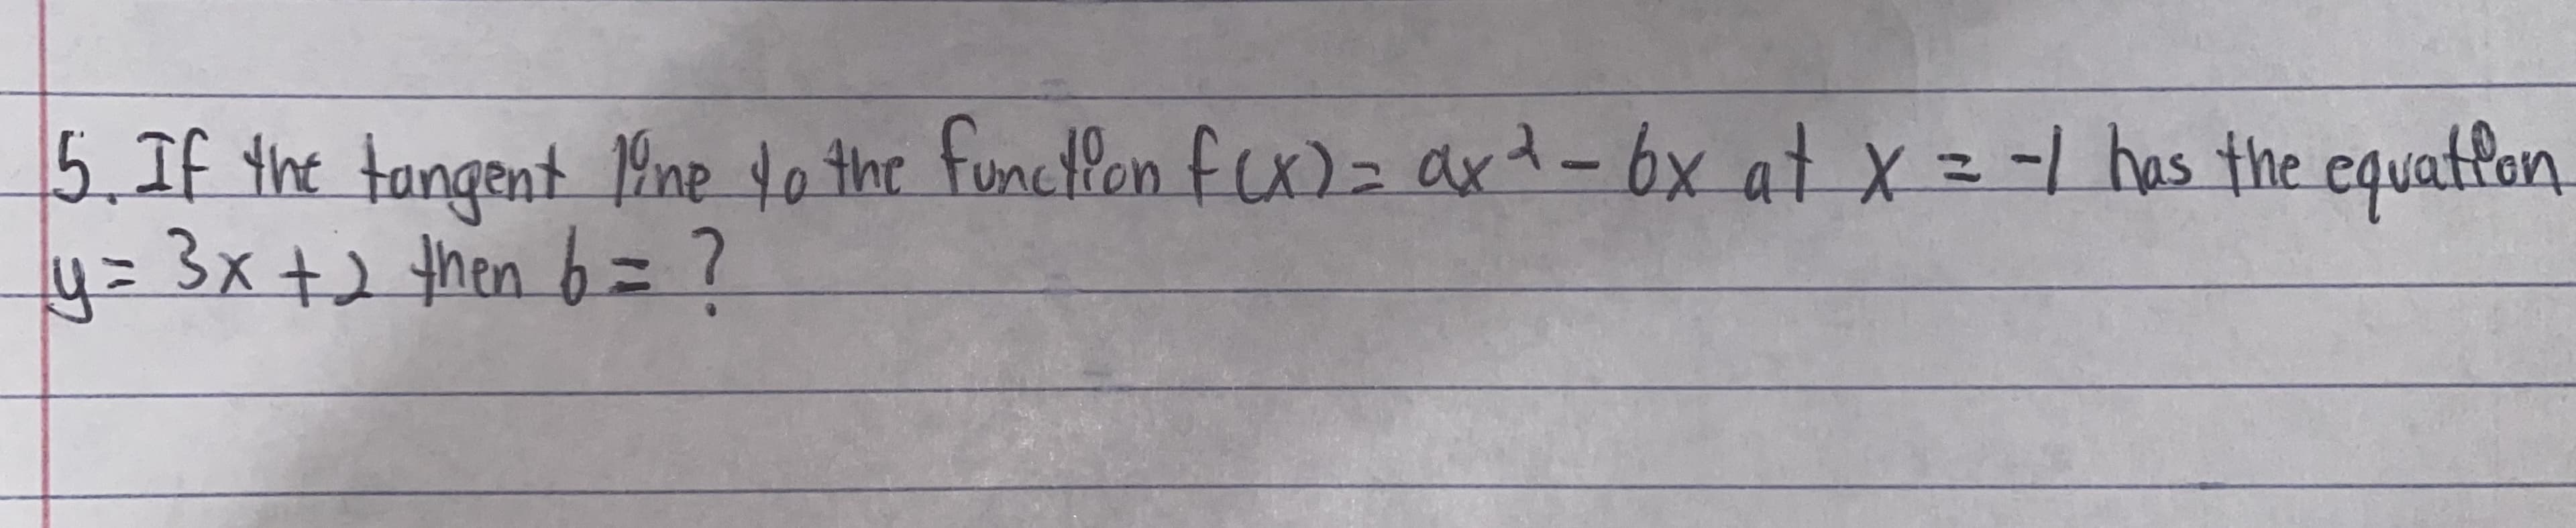 5.If the tangent 1ine to the functlen fx)= axt-6x at X=- has the equatfon.
y= 3x+2then 6=?
